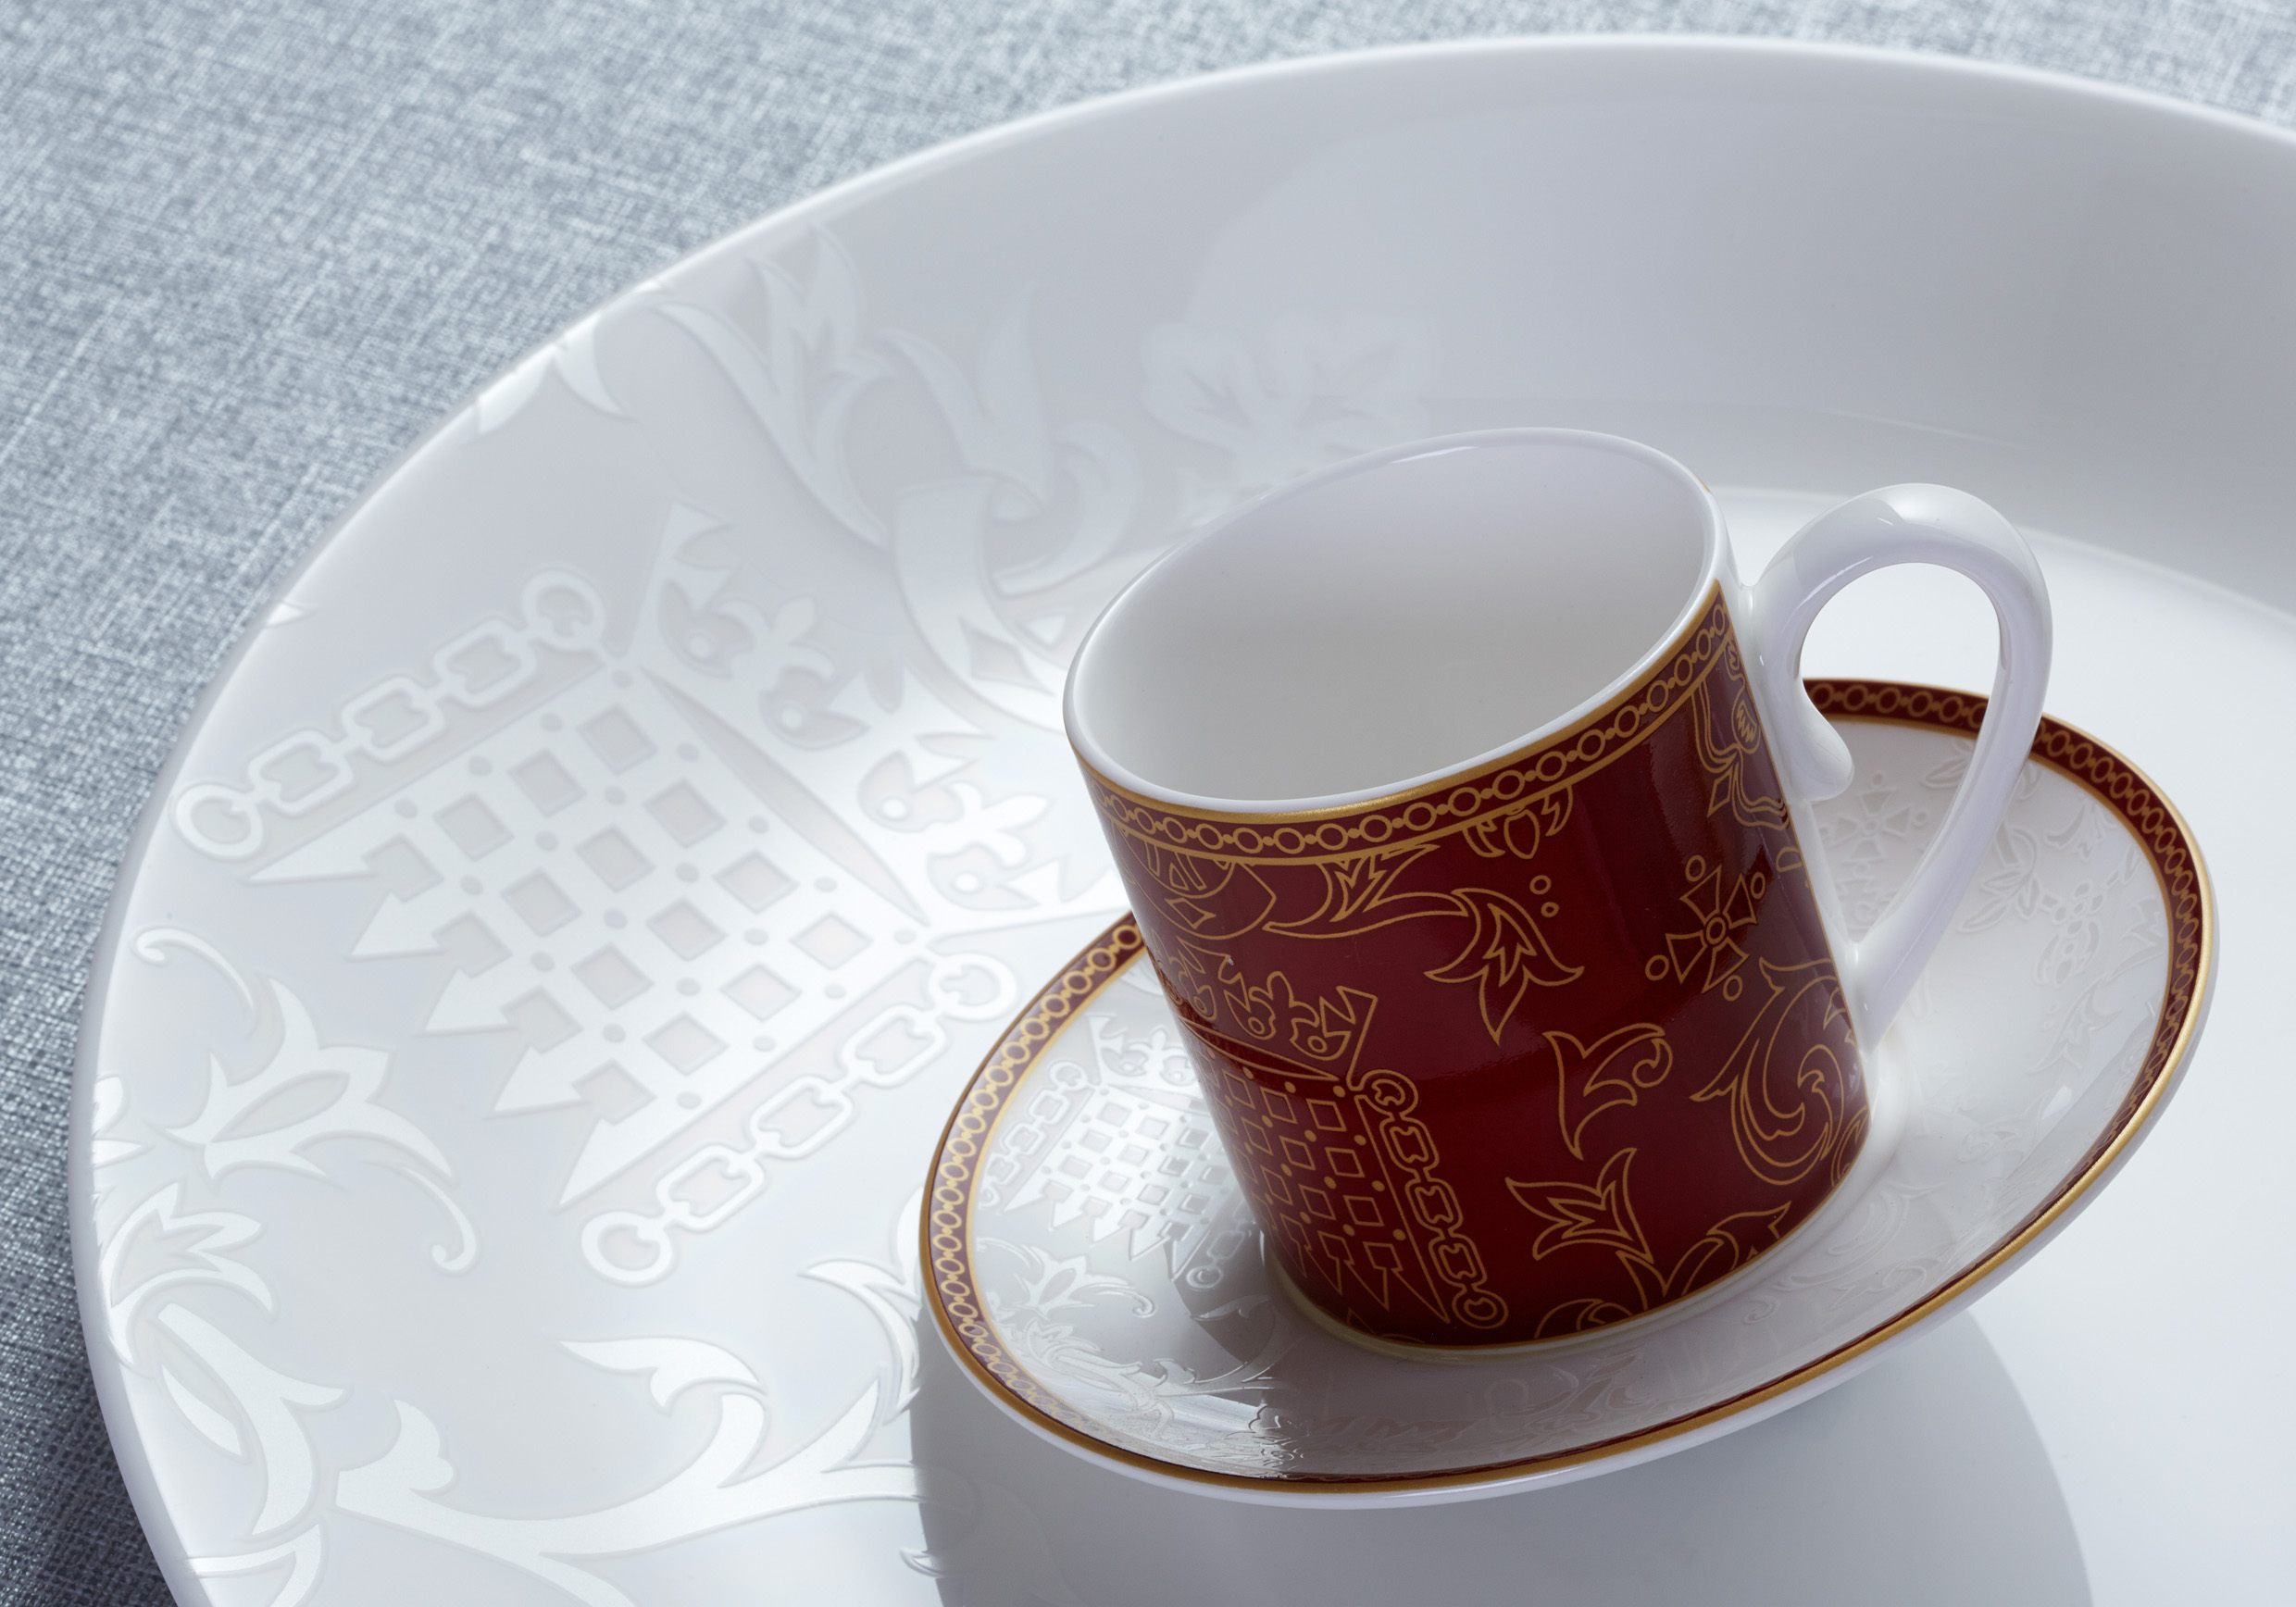 Bespoke bone china cup and saucer for the House of Lords